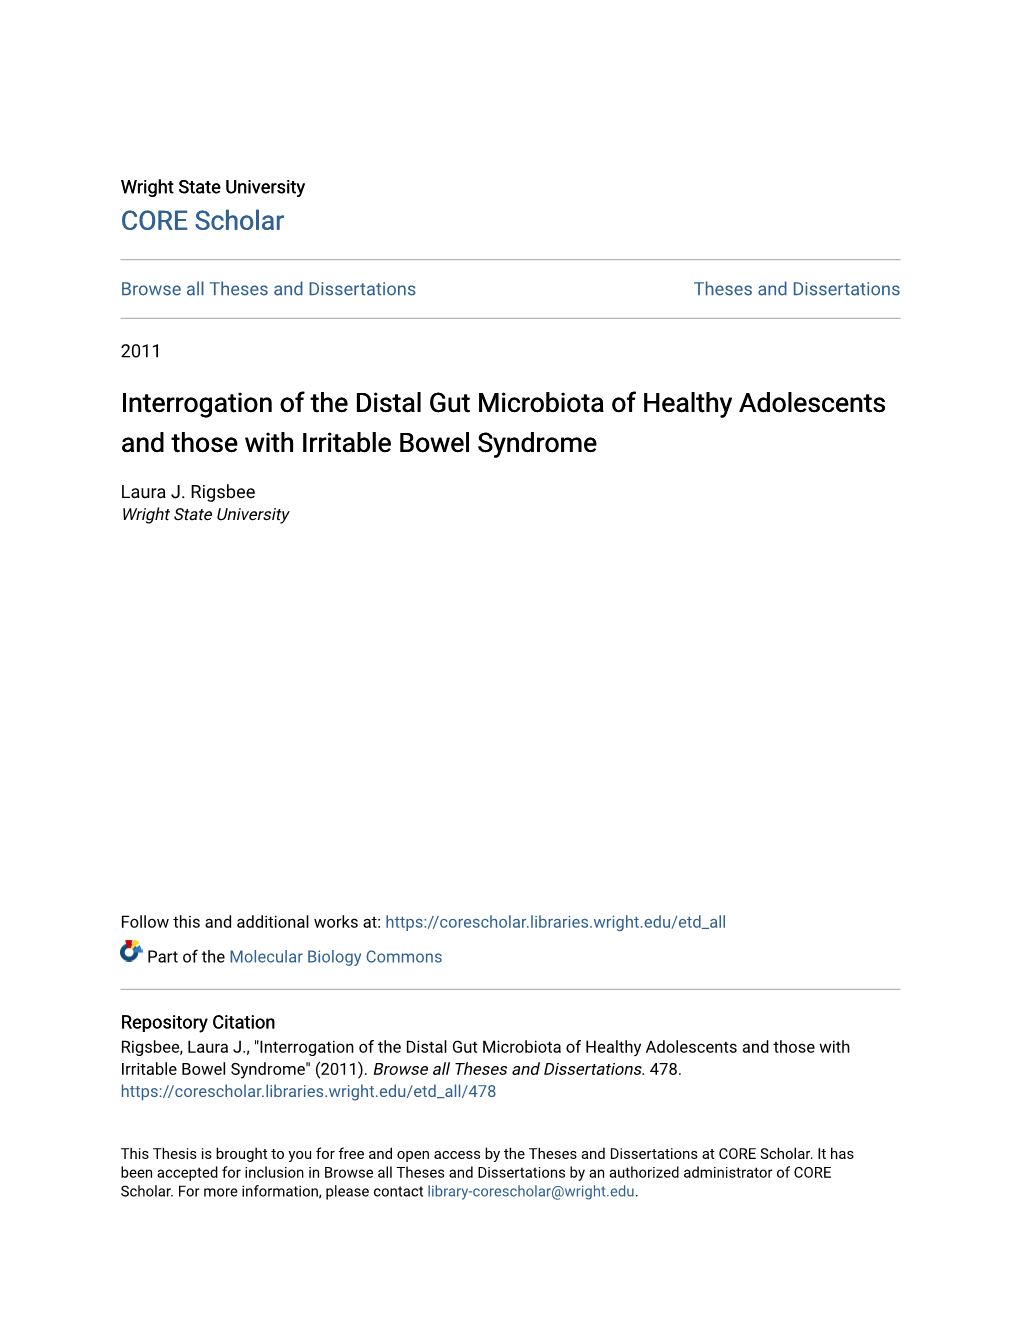 Interrogation of the Distal Gut Microbiota of Healthy Adolescents and Those with Irritable Bowel Syndrome